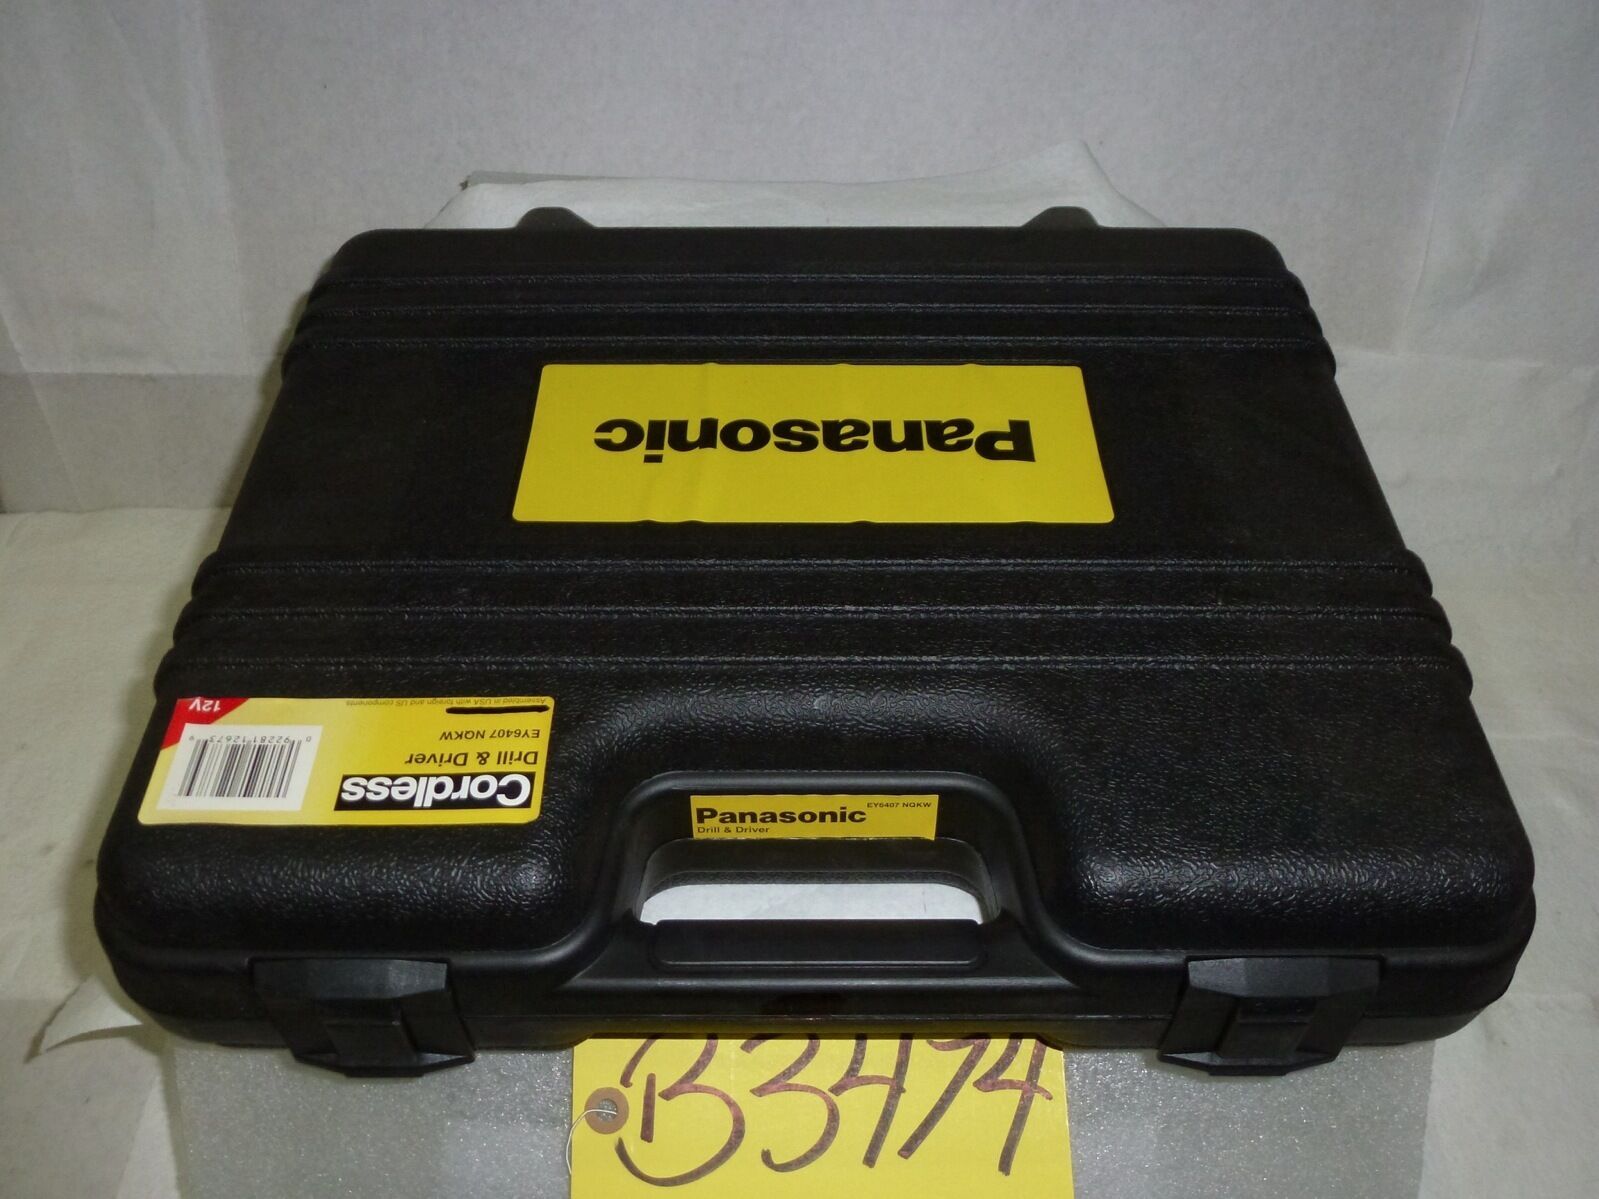 Panasonic Drill and Driver Case {Drill NOT Included} - $41.00